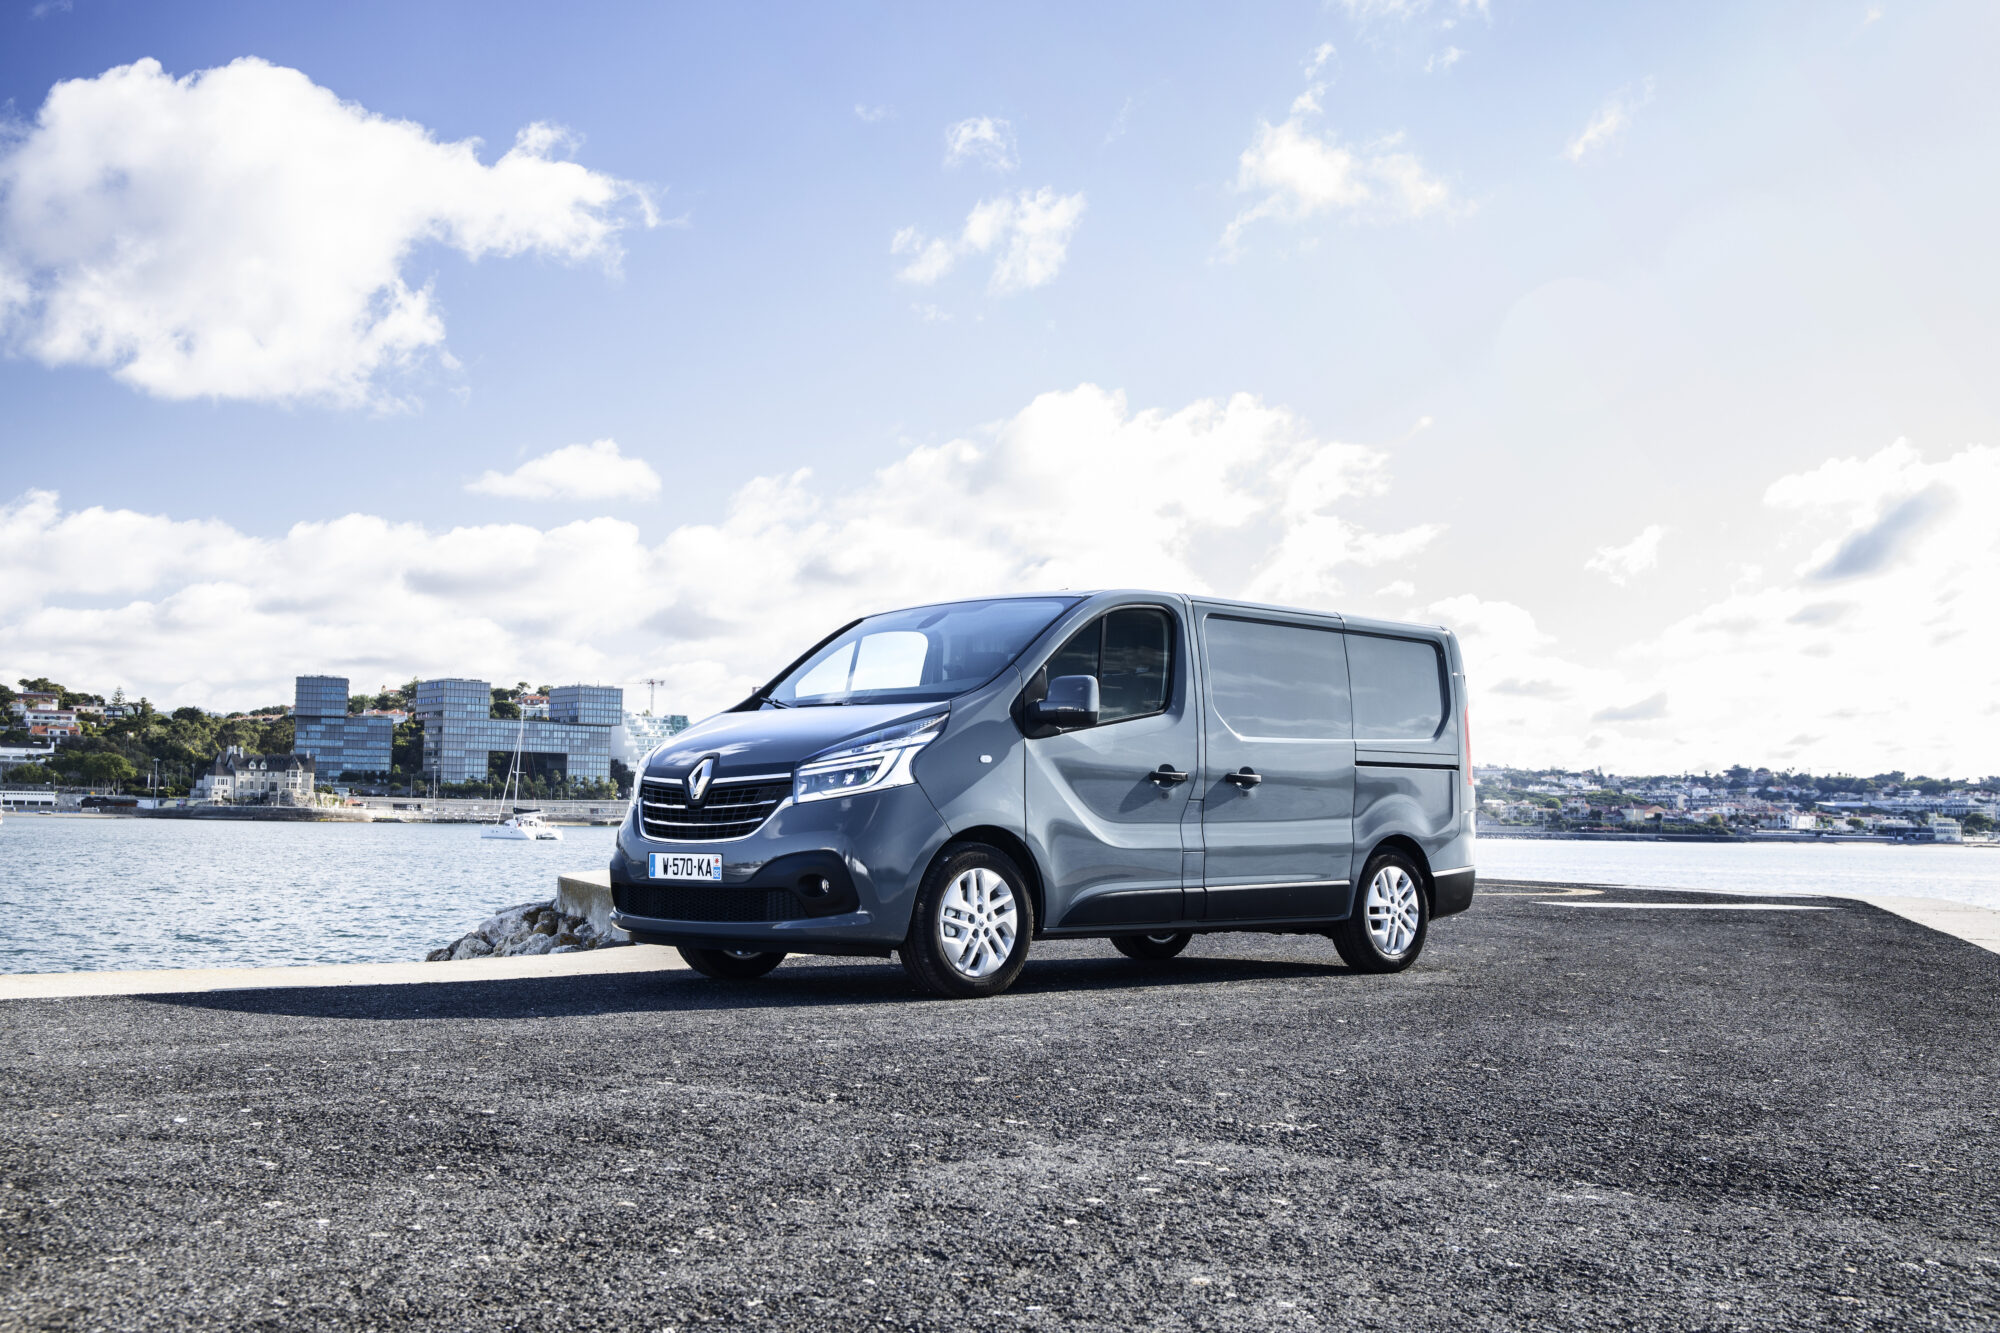 2019 - New Renault TRAFIC press tests in Portugal